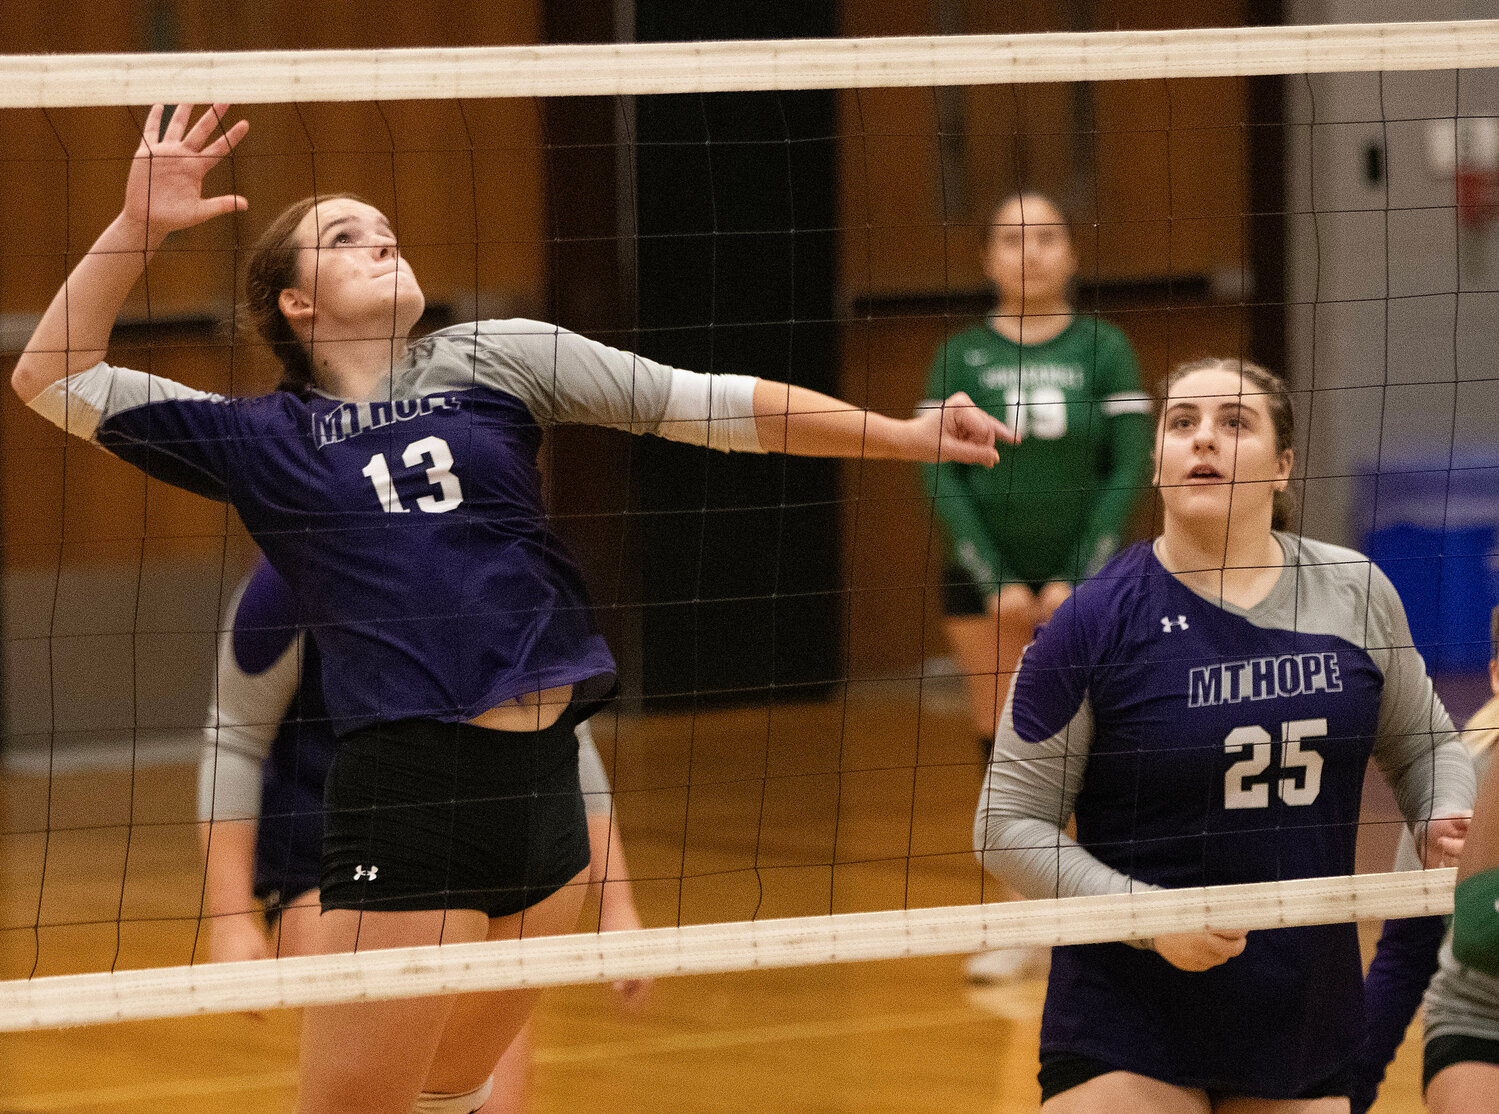 Mia Shaw (left) elevates to spike the ball with teammate Gianna Lunney looking on.